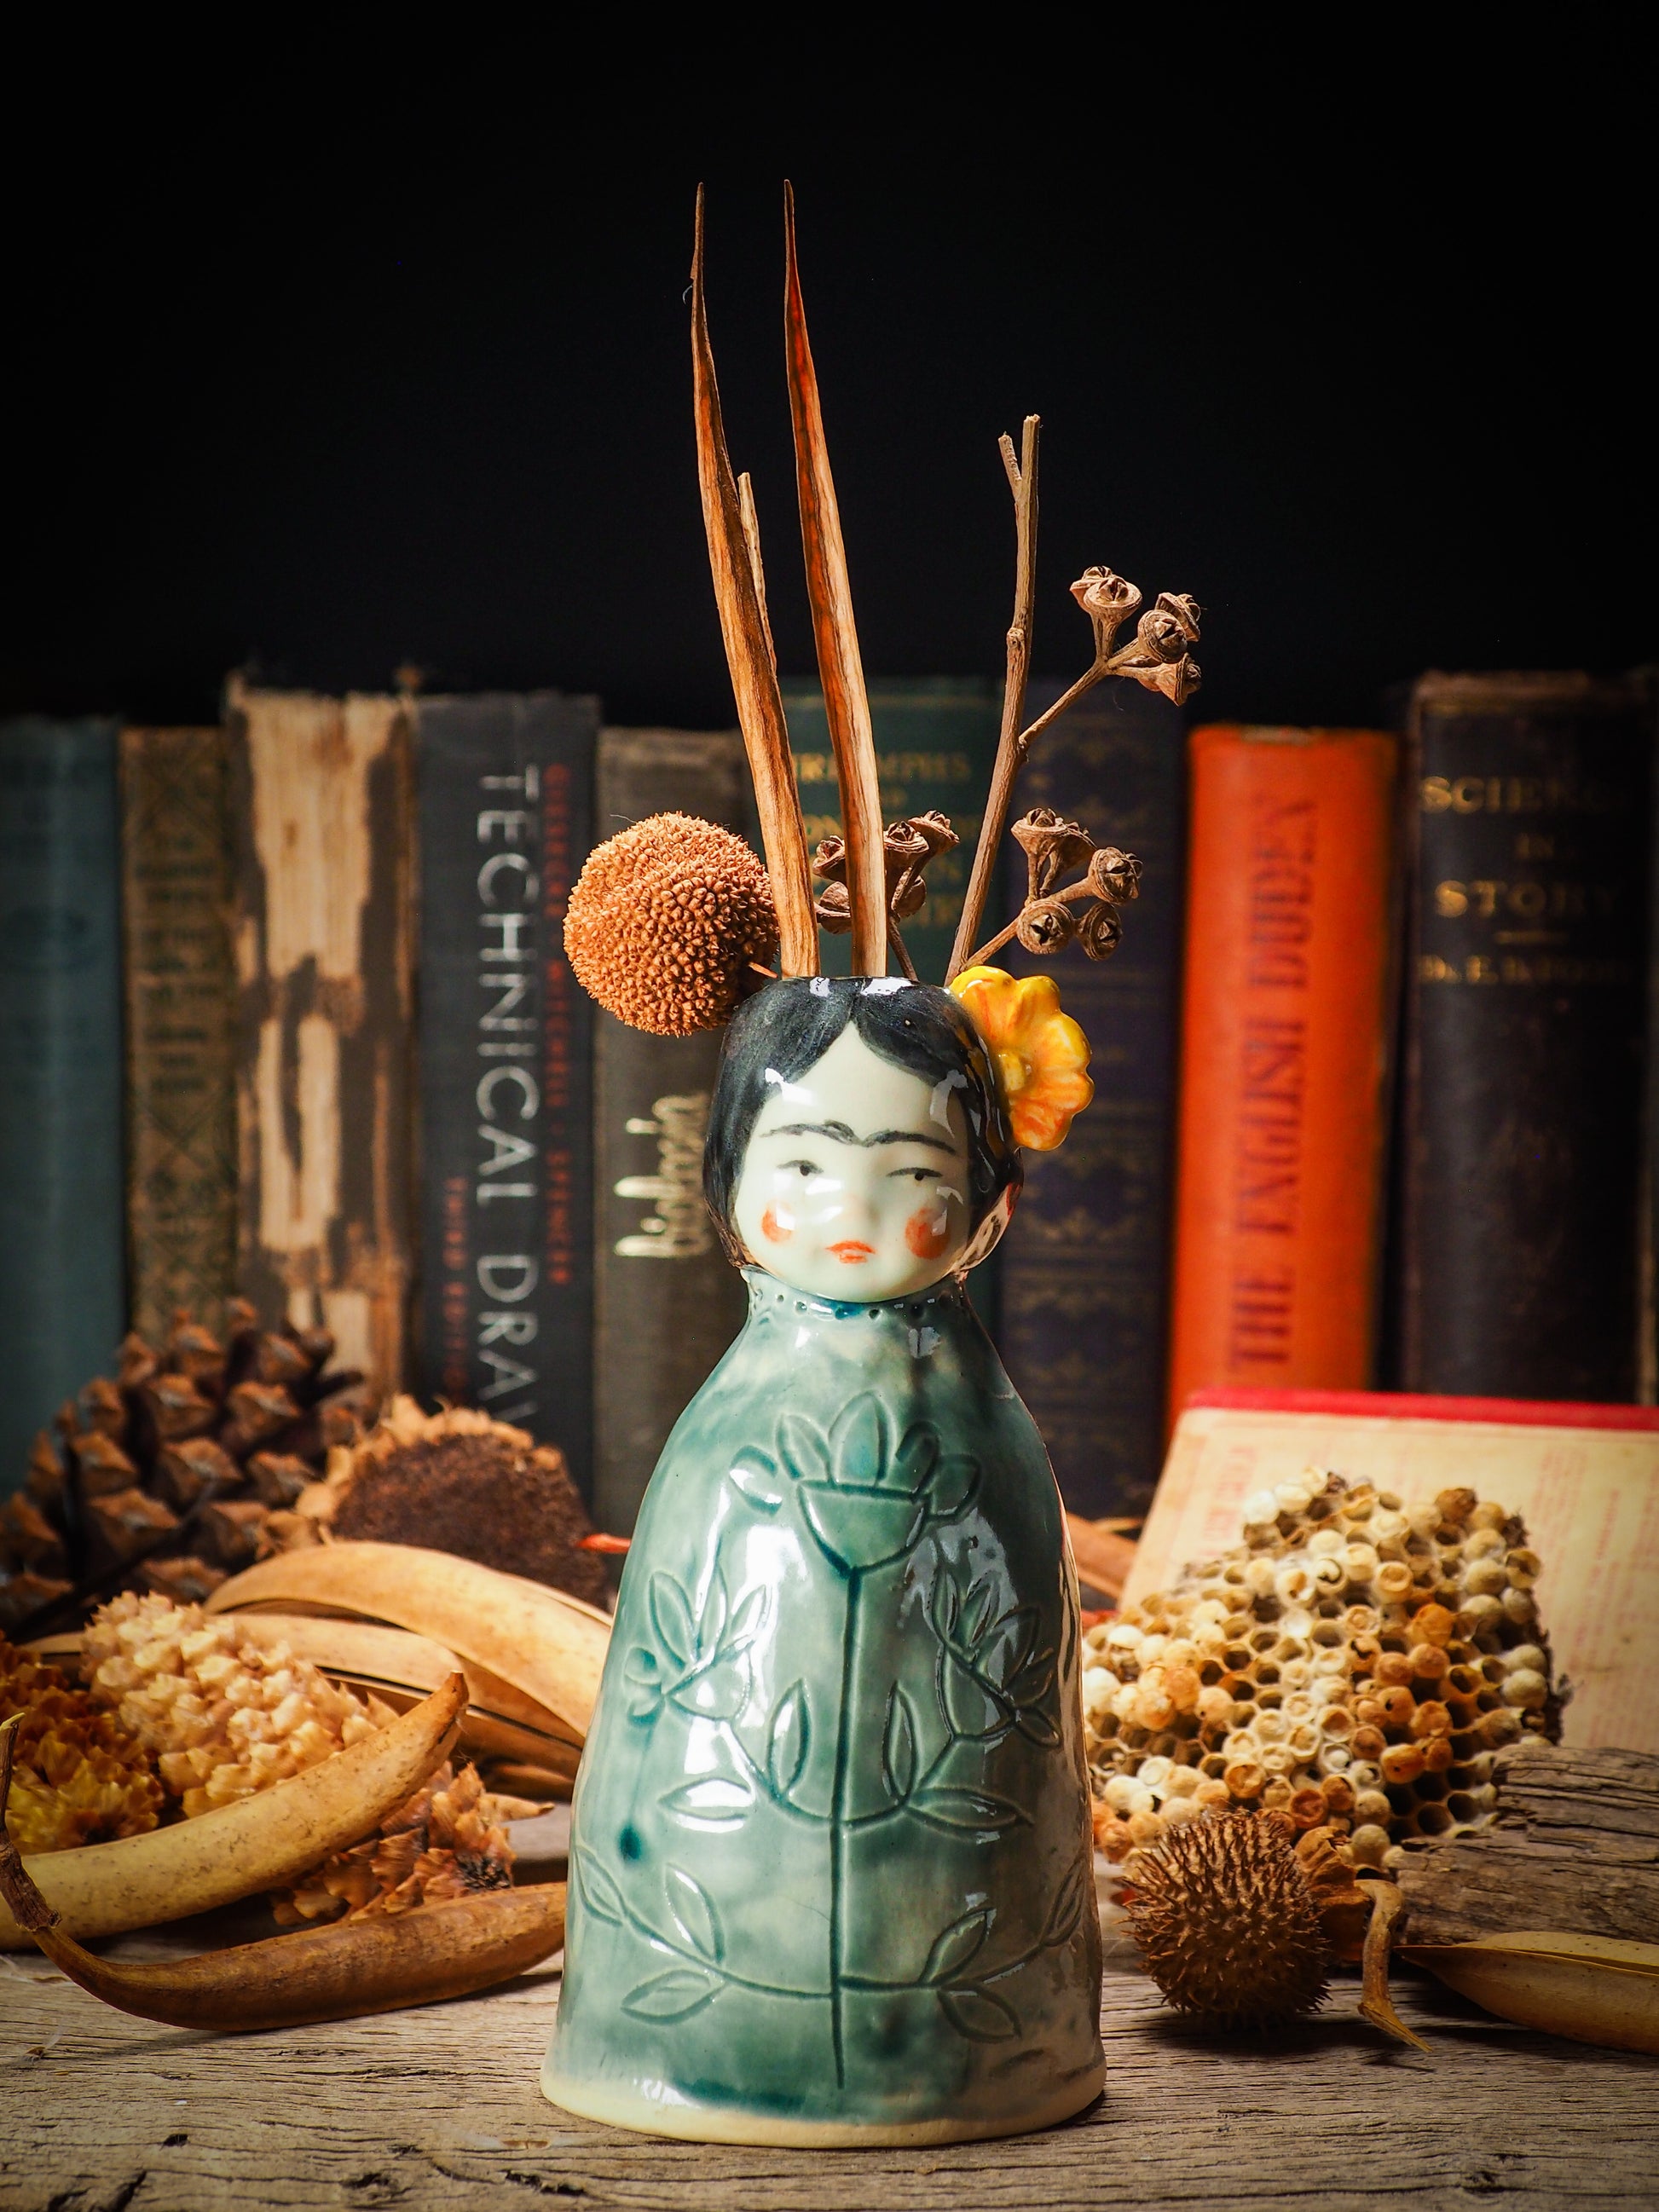 Original handmade ceramic flower vase,  artist brush and pencil holder by Idania Salcido, Danita Art. Frida Kahlo with flowers in her head and sgraffito body details. Handmade touch to any artist's studio with handmade glazed ceramic good for watercolors acrylics inks and oil paints. Clean with water or mineral spirits.